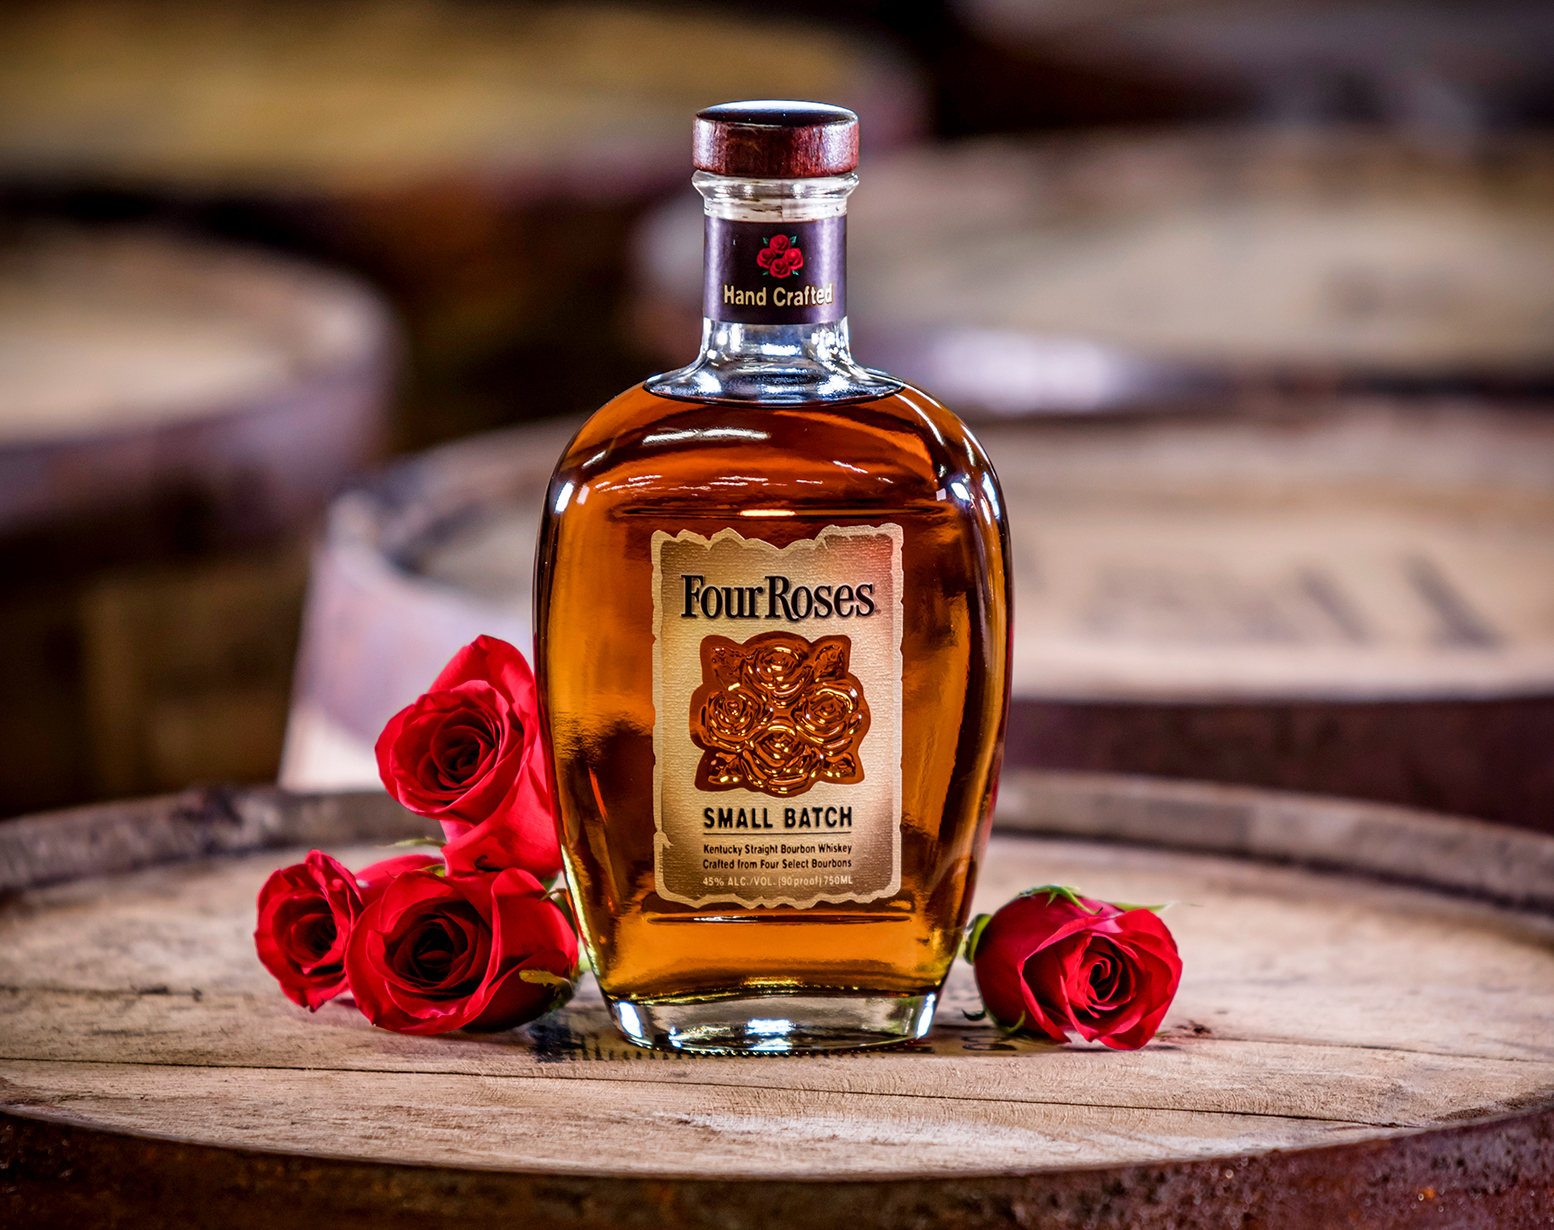 Four roses small batch